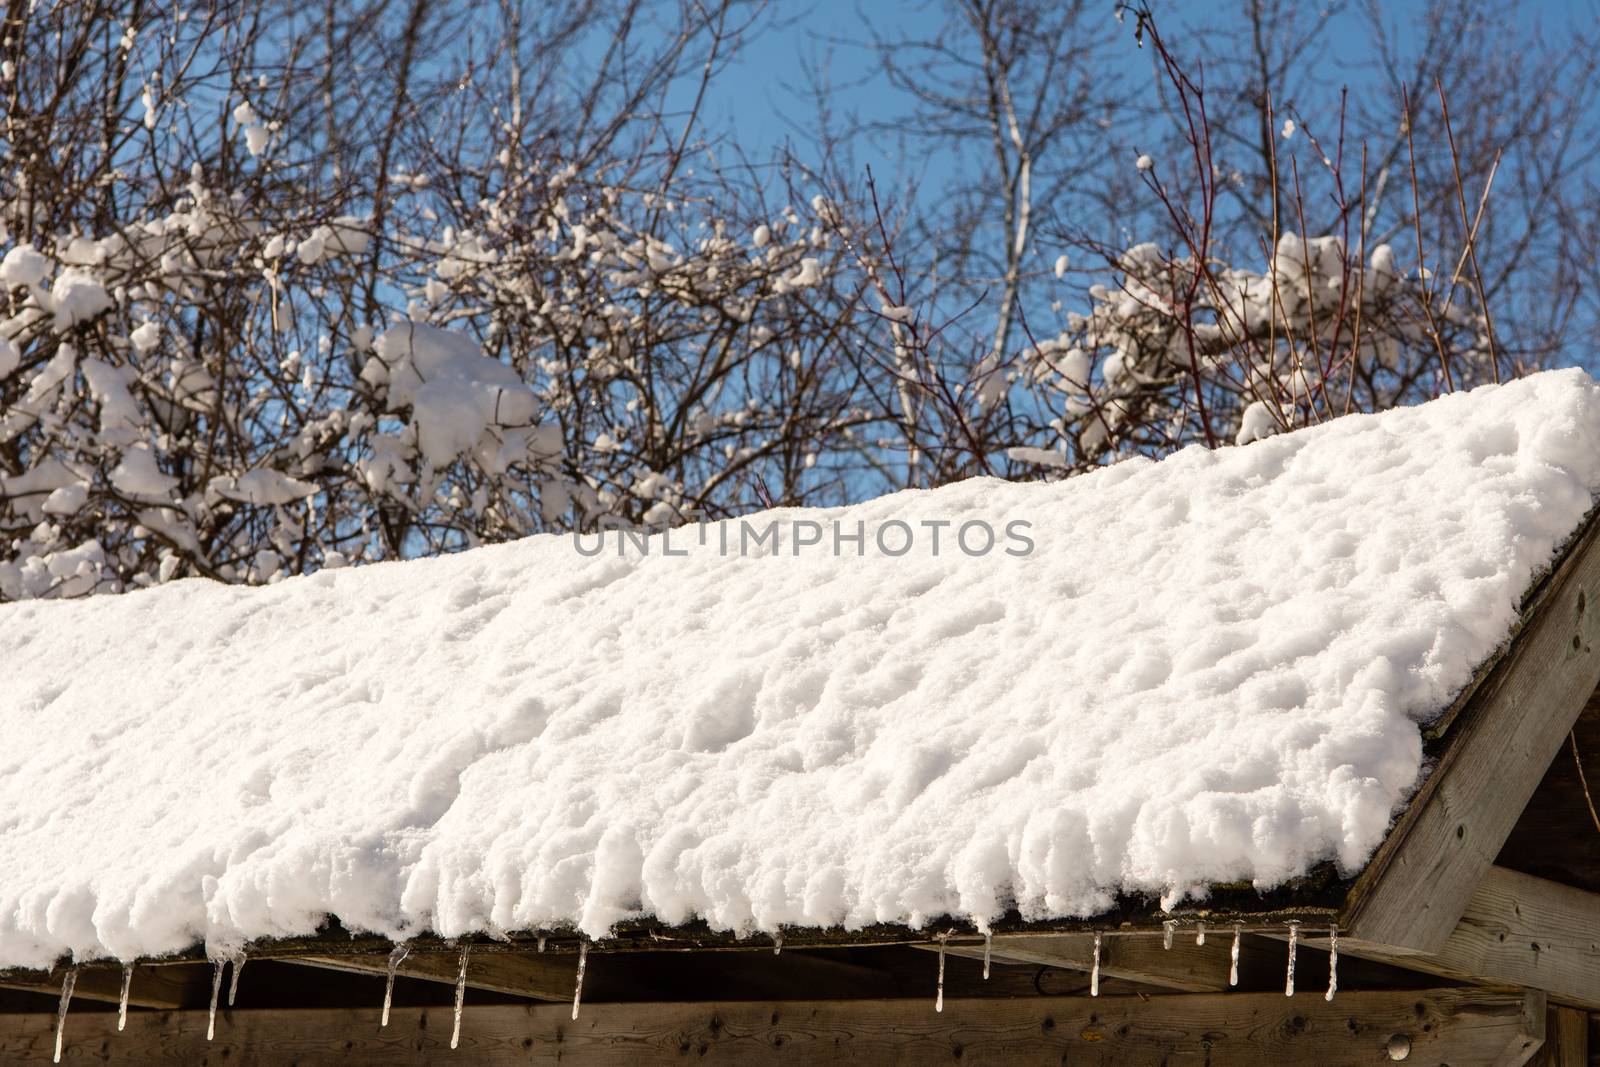 Fragment of a snow covered roof with hanging icicles